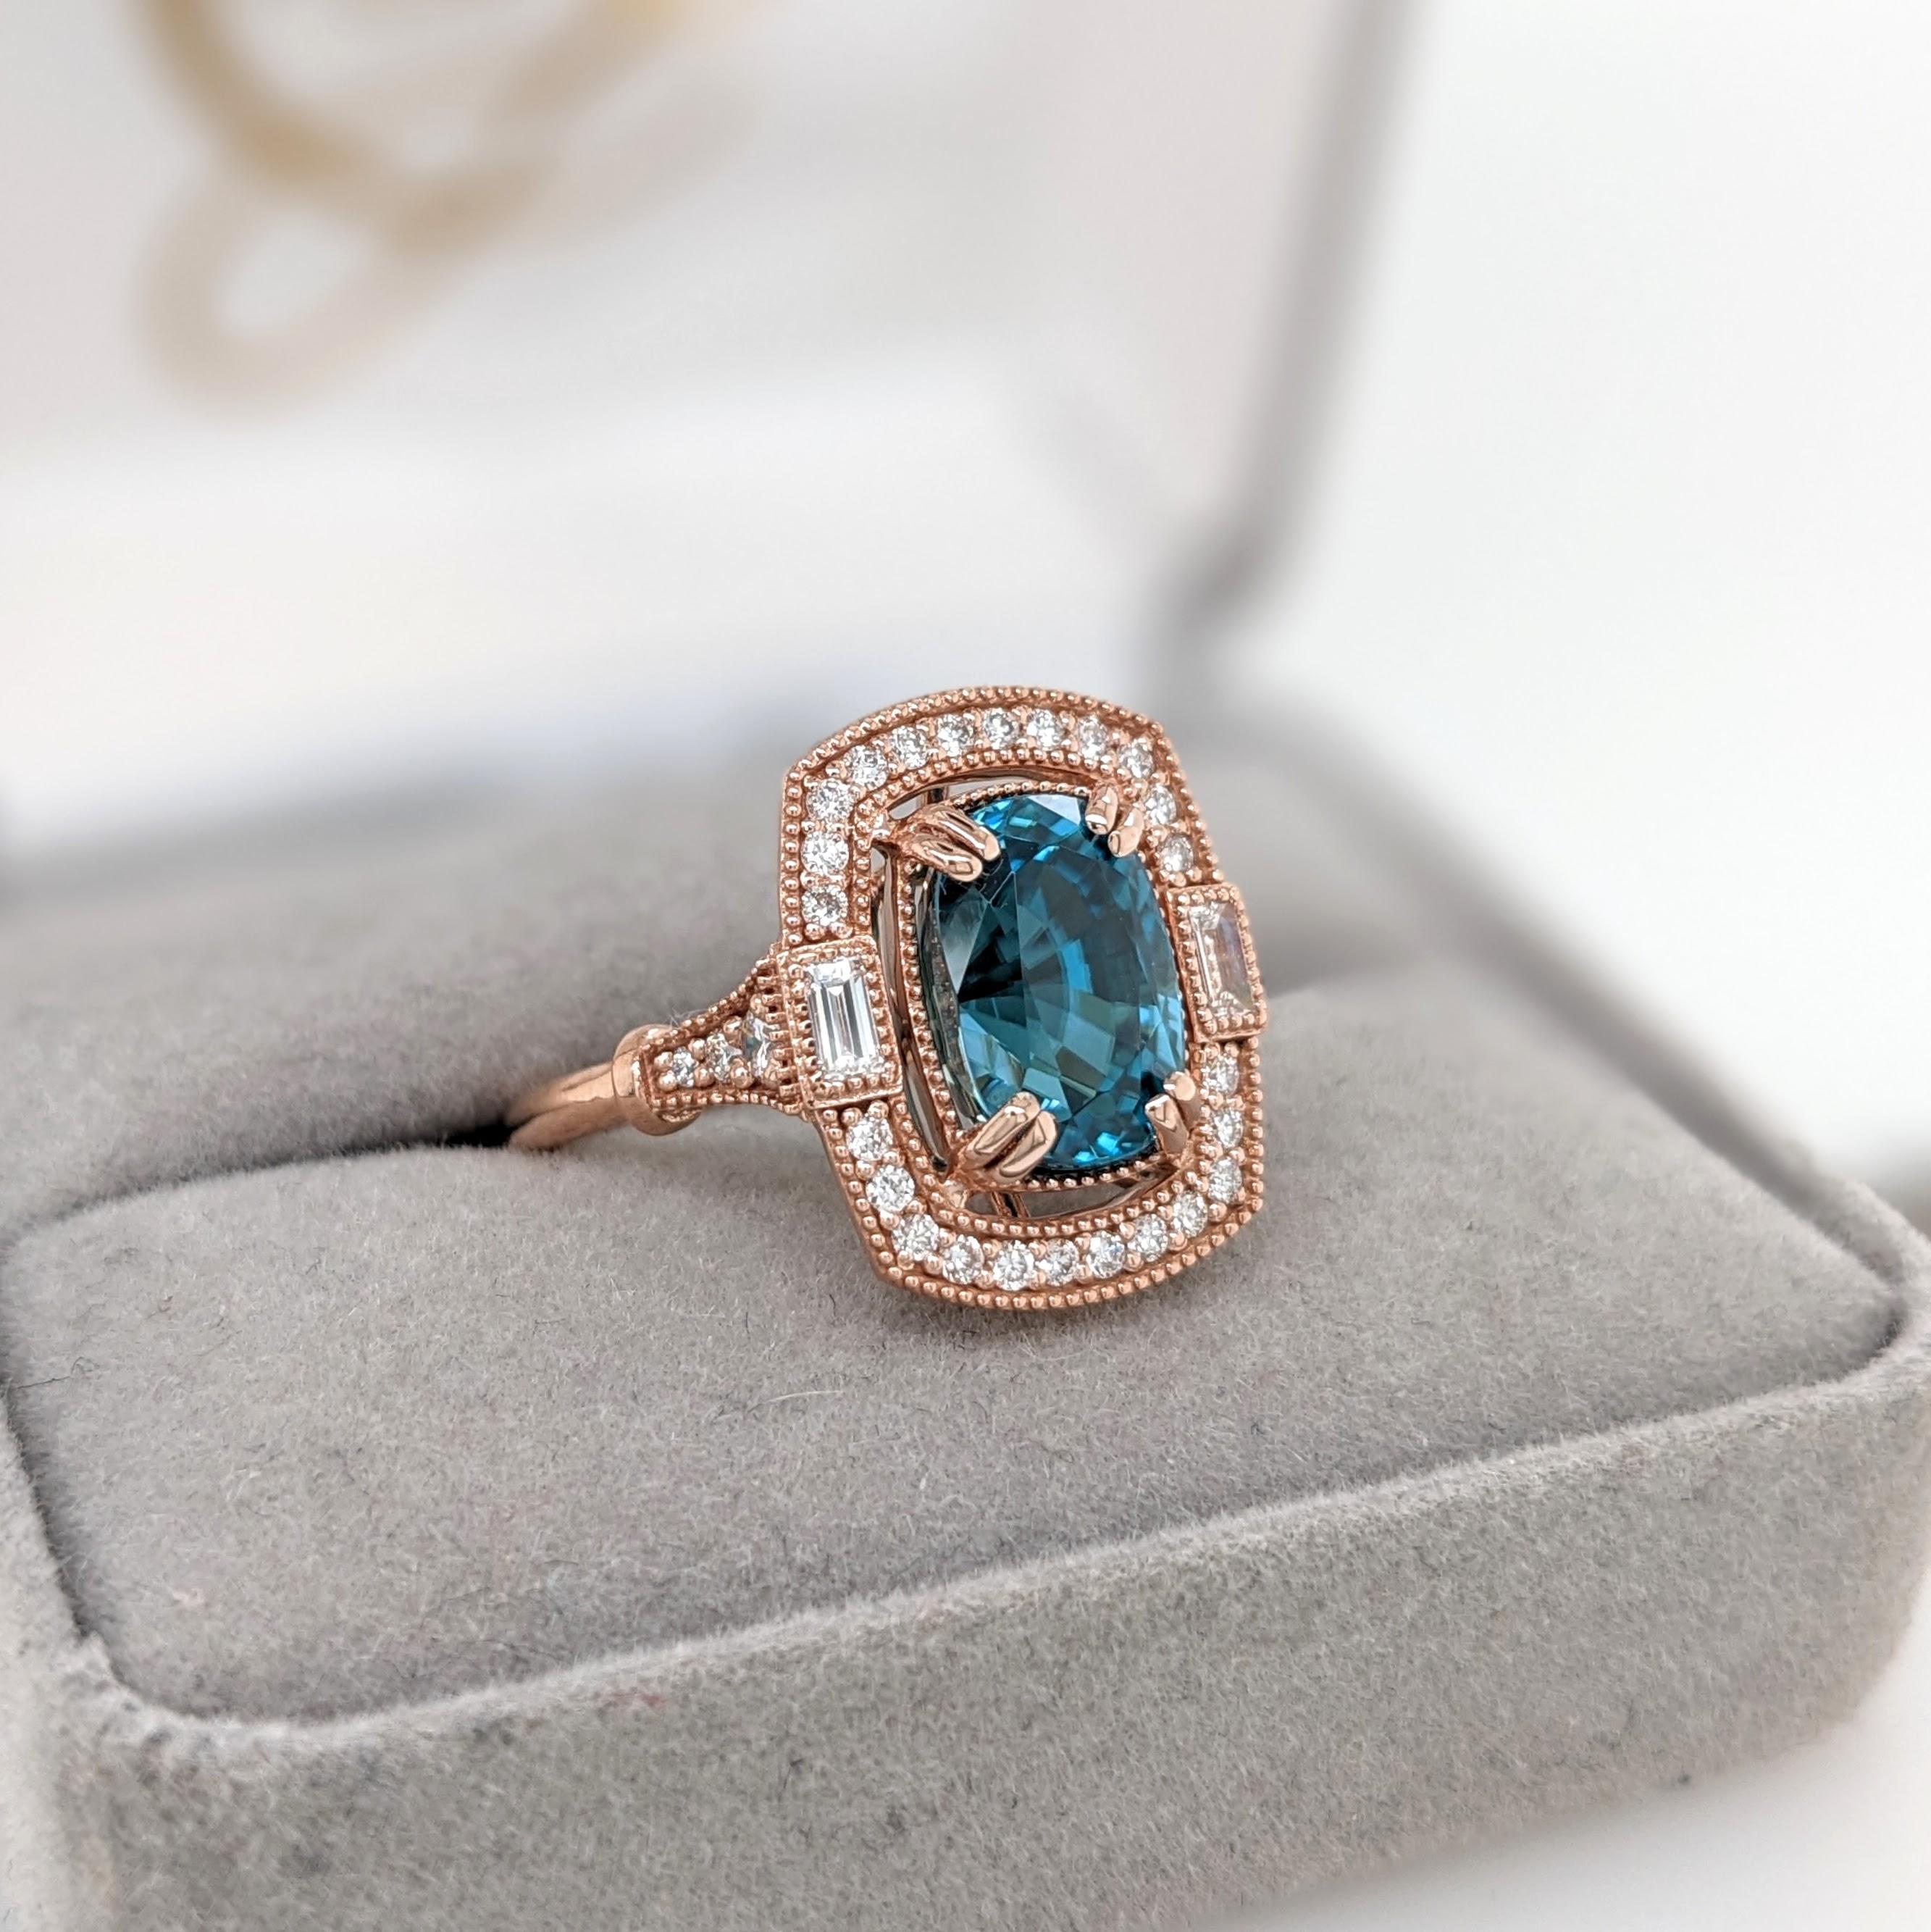 5.4ct Blue Zircon Ring w Earth Mined Diamonds in Solid 14K Rose Gold CU 10x7mm For Sale 1